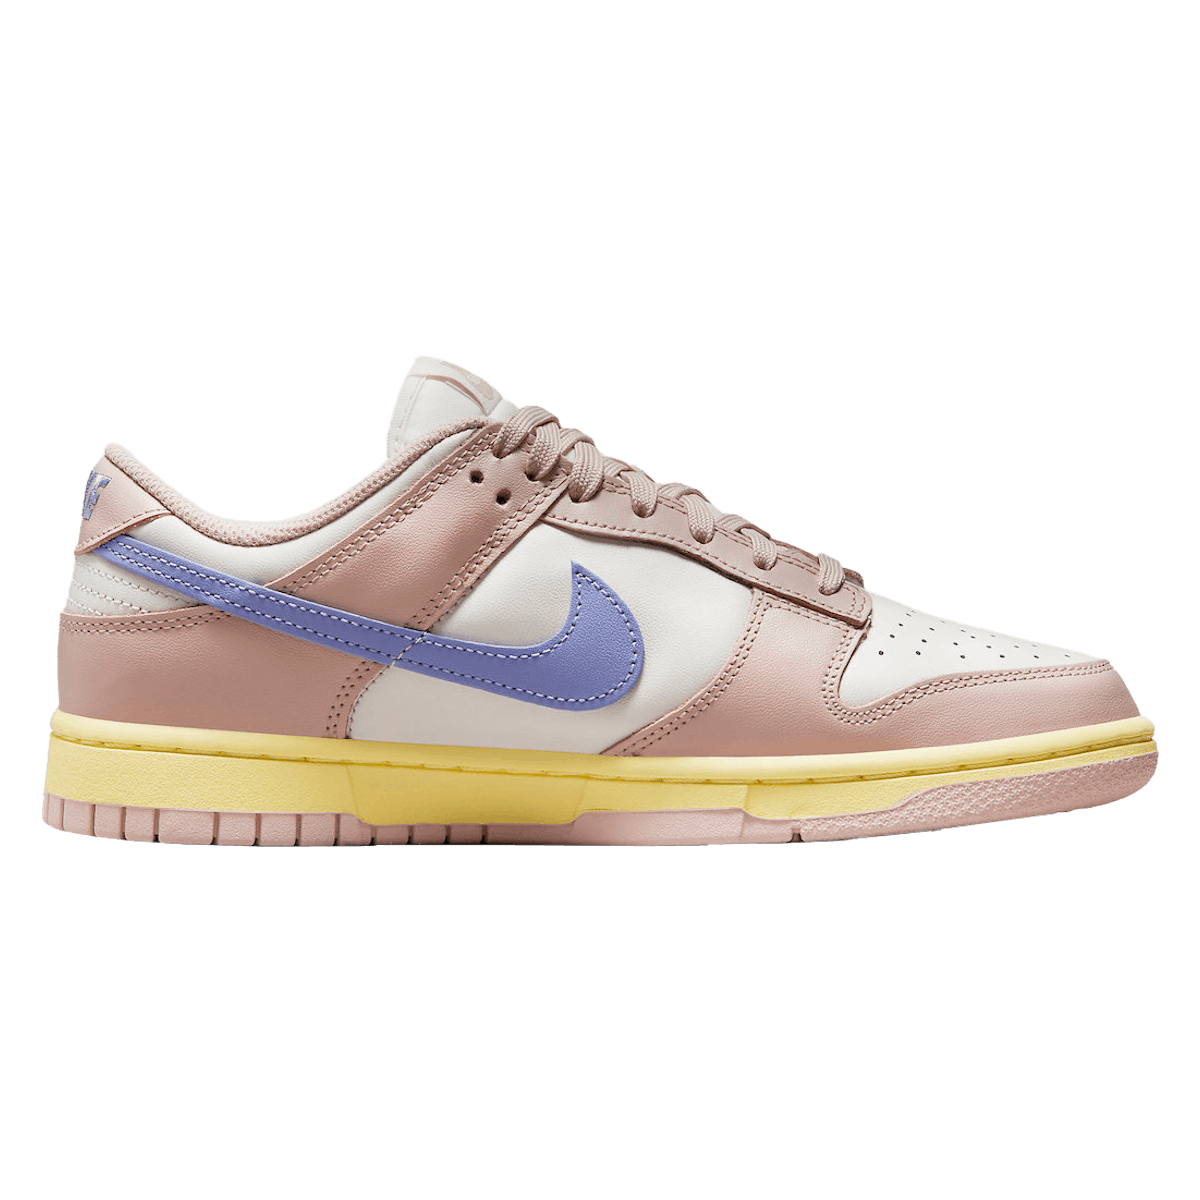 Nike Dunk Low WMNS "Pink Oxford"